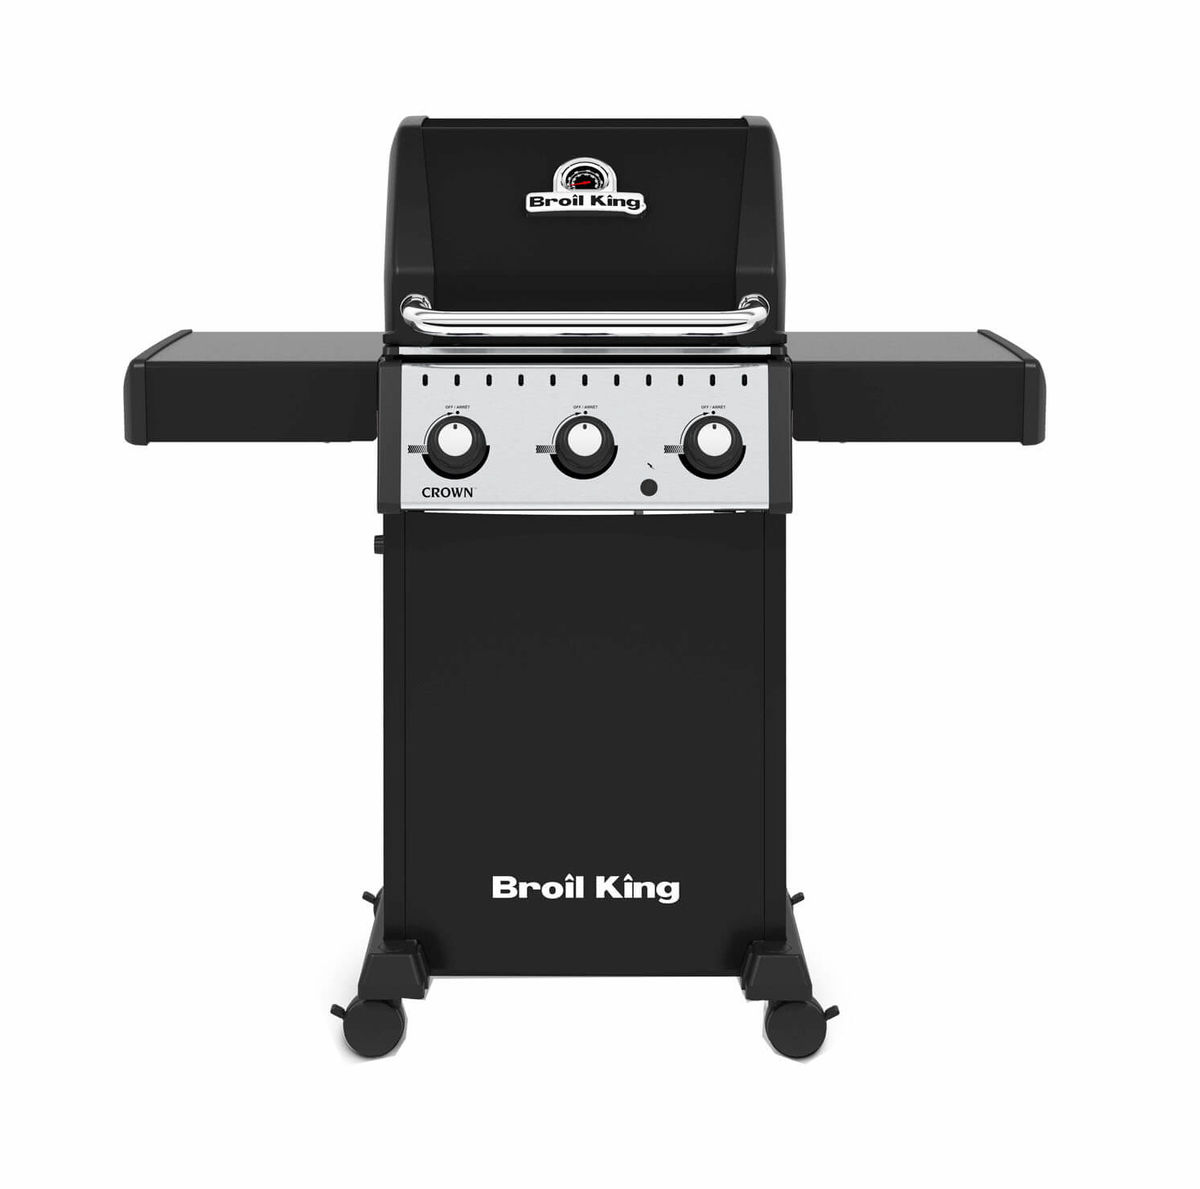 Image of Broil King Crown 310 Grill bei nettoshop.ch